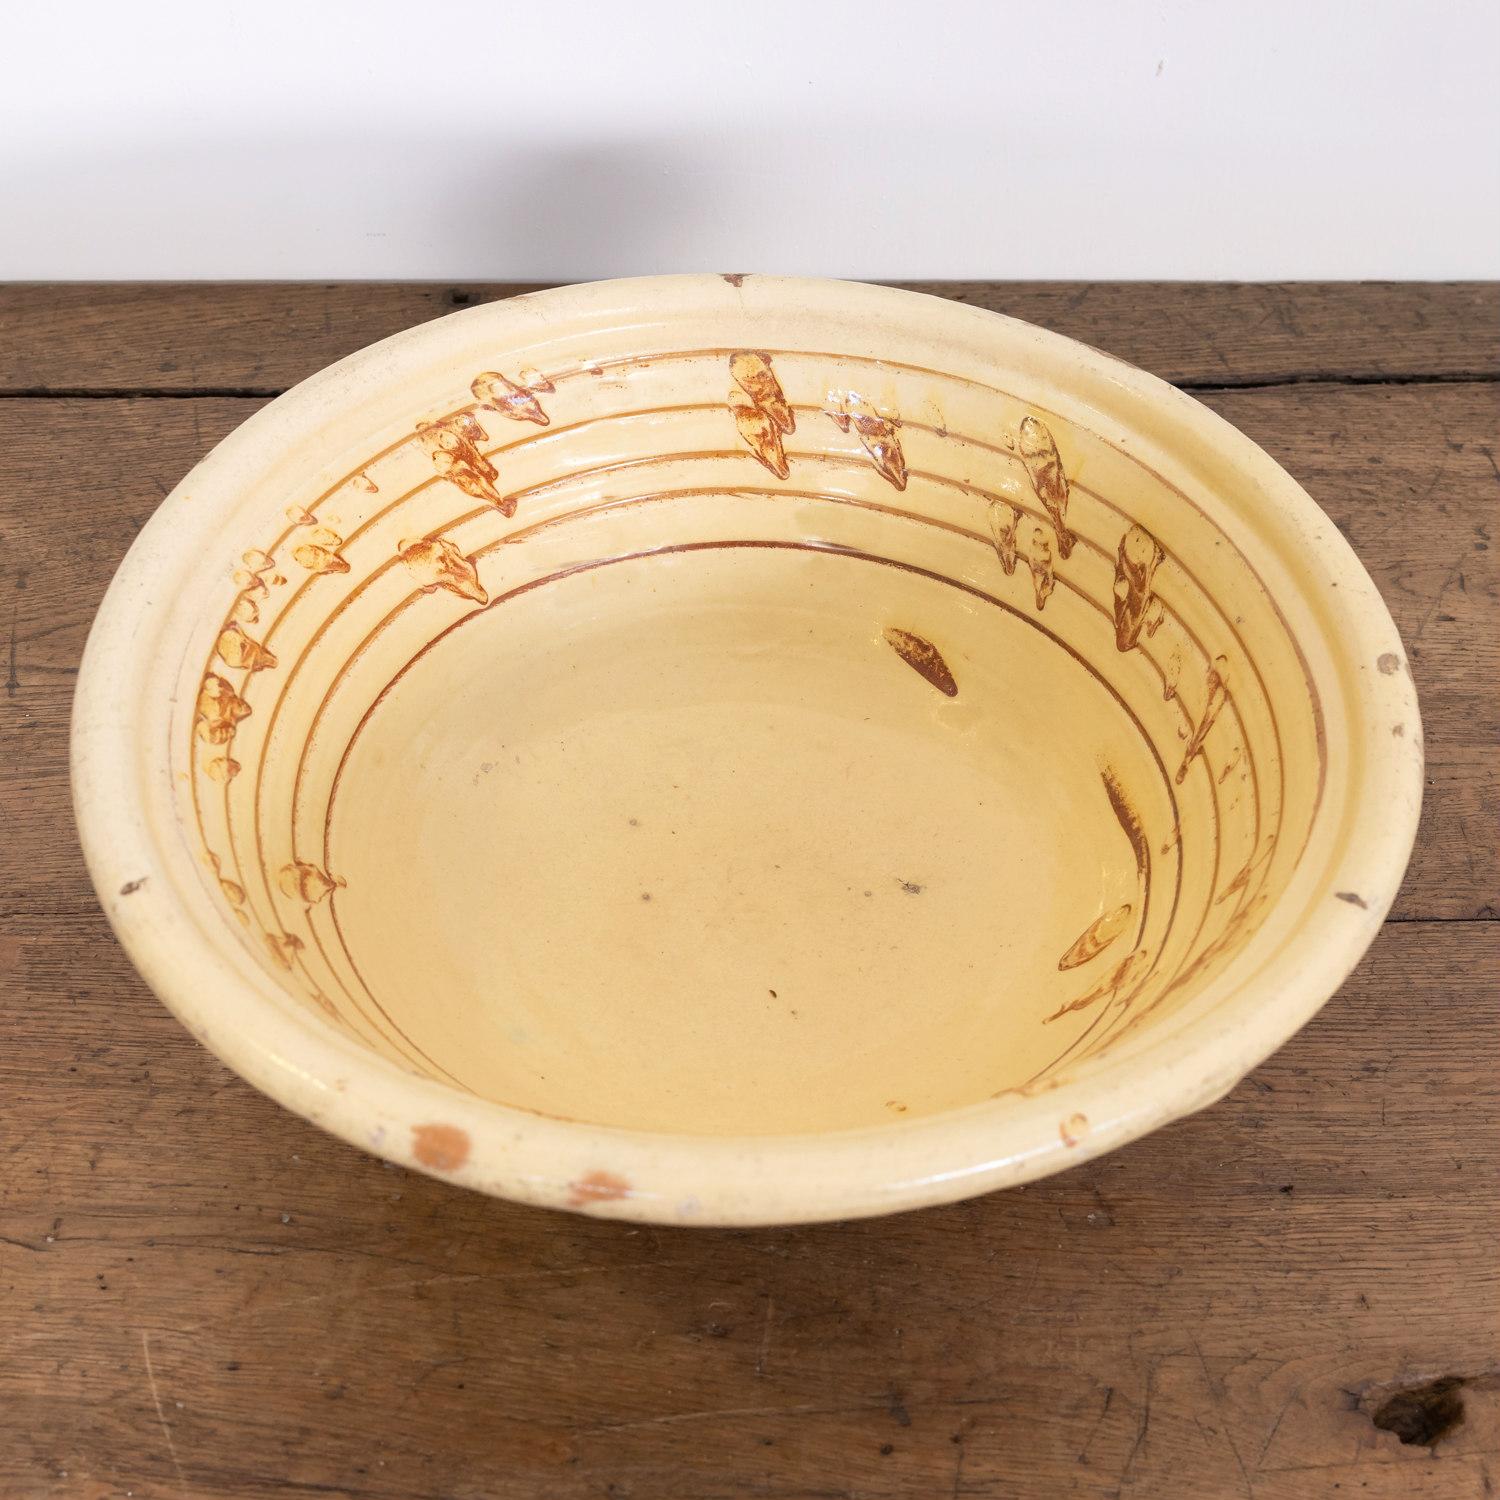 A late 19th century French pancheon or dough bowl with an interior honey yellow glaze and caramel splatters, circa 1880s. Pancheons were multipurpose terracotta kitchen bowls used during the 17th, 18th, and 19th centuries. In addition to being used